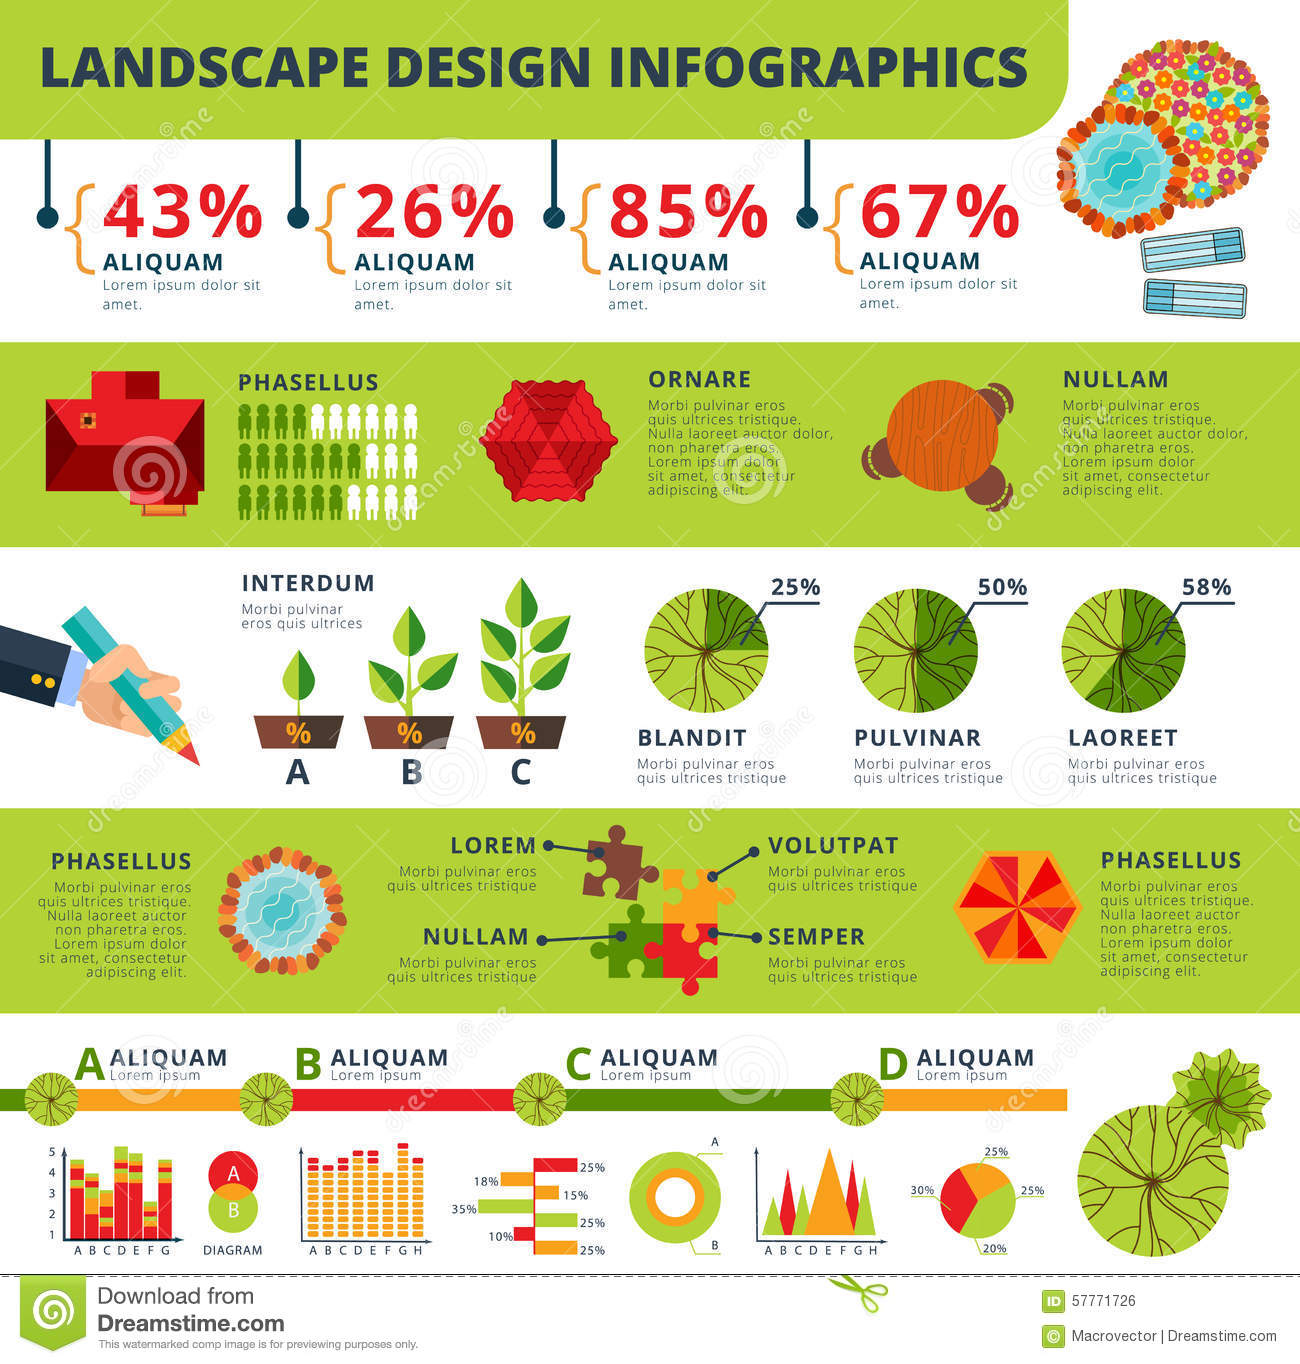 Beginners Guide to Better Landscape Photography: Infographic | The Dream Within Pictures